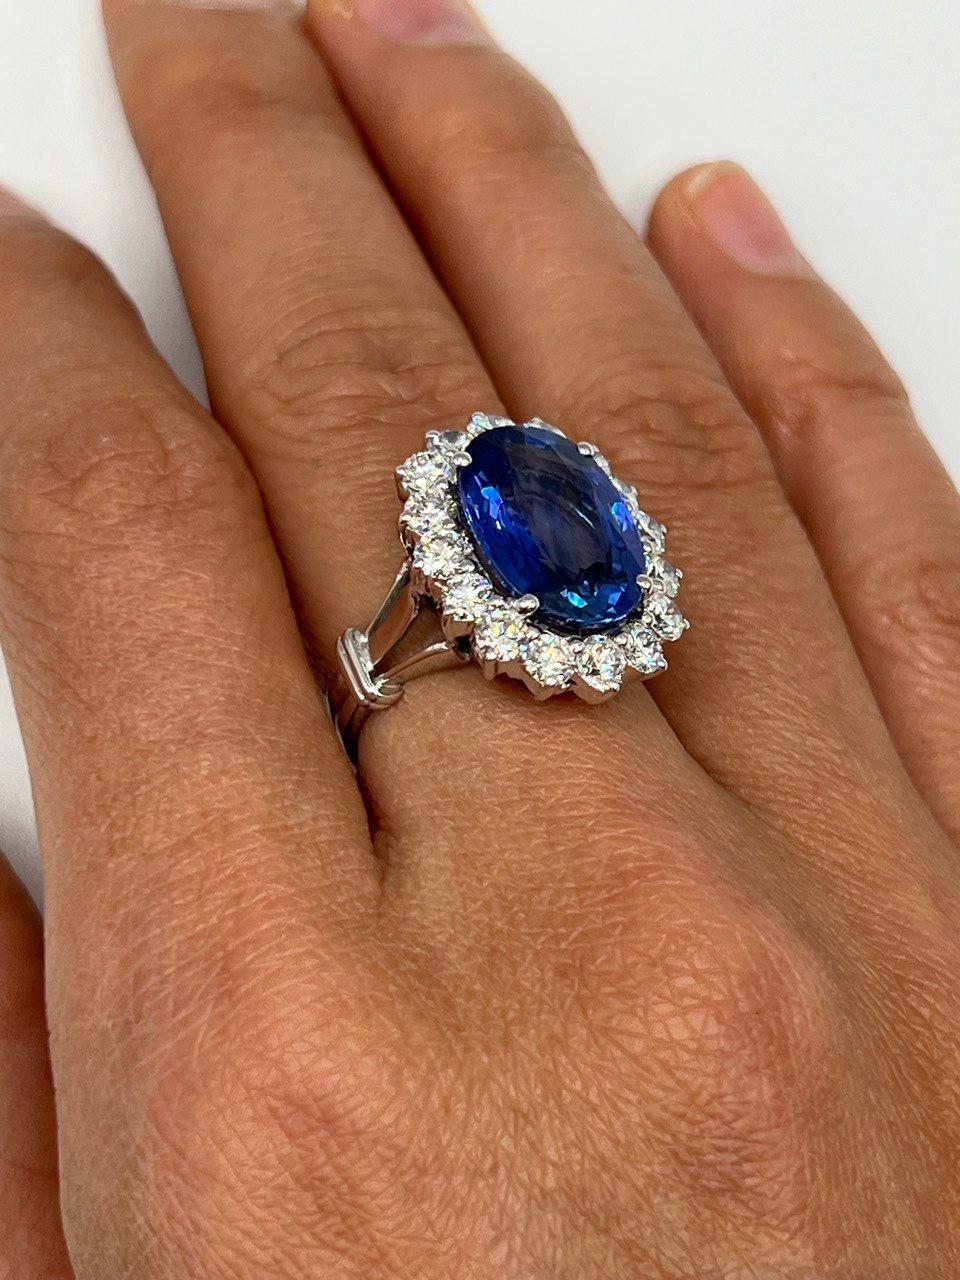 beautiful 18k white gold ring with natural untreated 8.09 carat blue sapphire ; this stone is from Sri Lanka.
the main stone surrounded by 1.60 carat round diamonds.
the diamonds are F-G color and Vs in clarity.